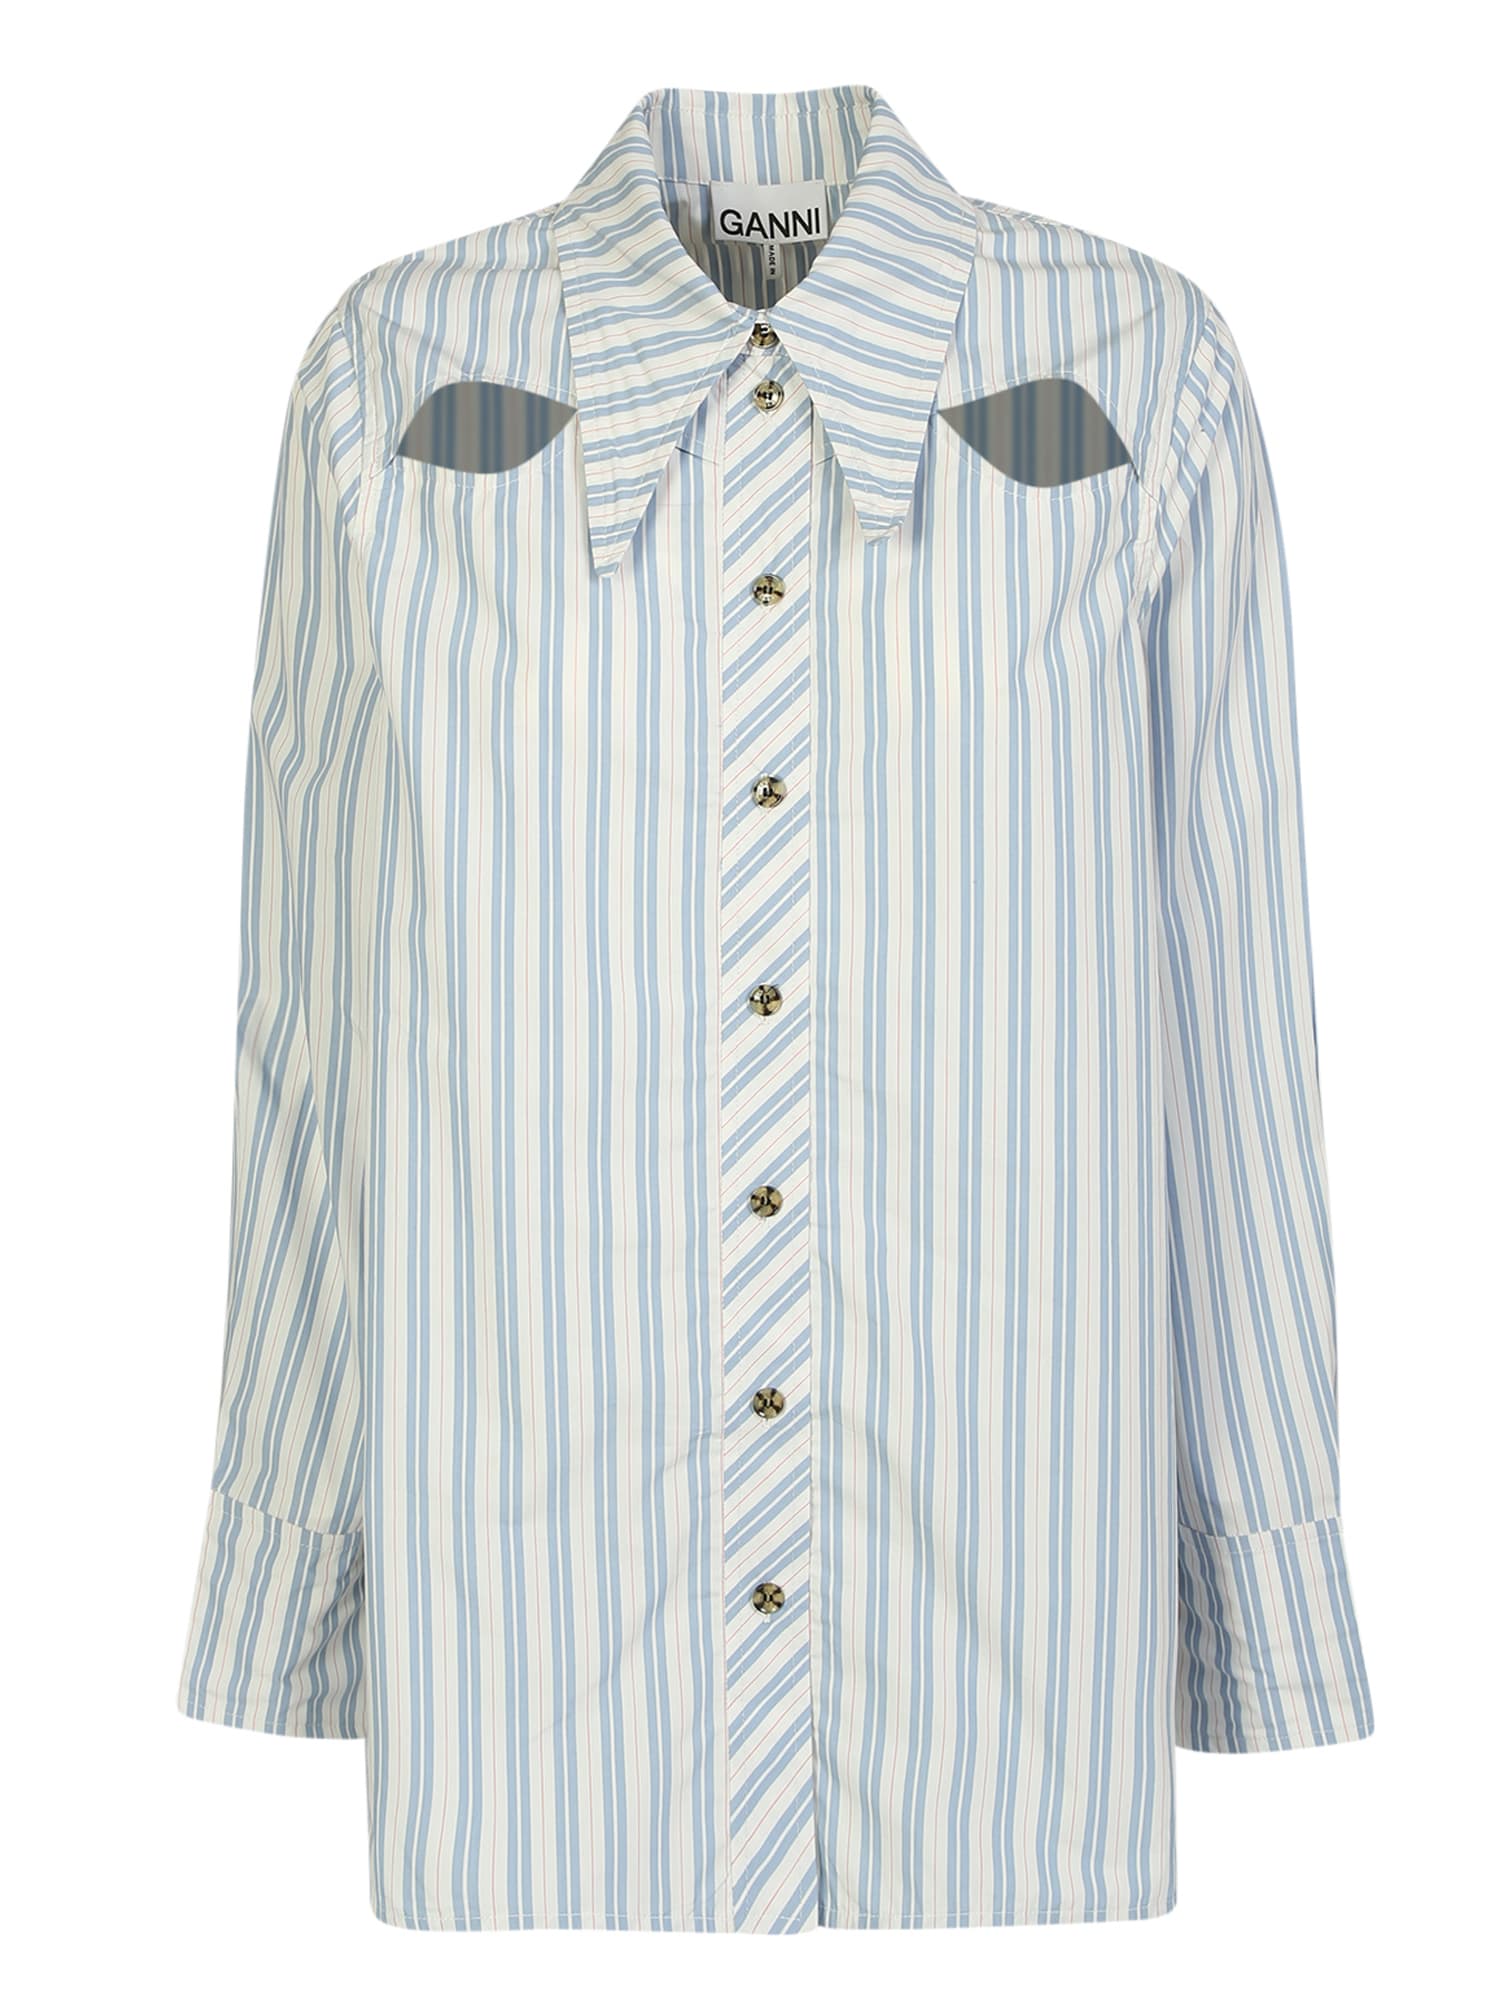 Gannis Tailored Imprint Presented In This Striped Shirt